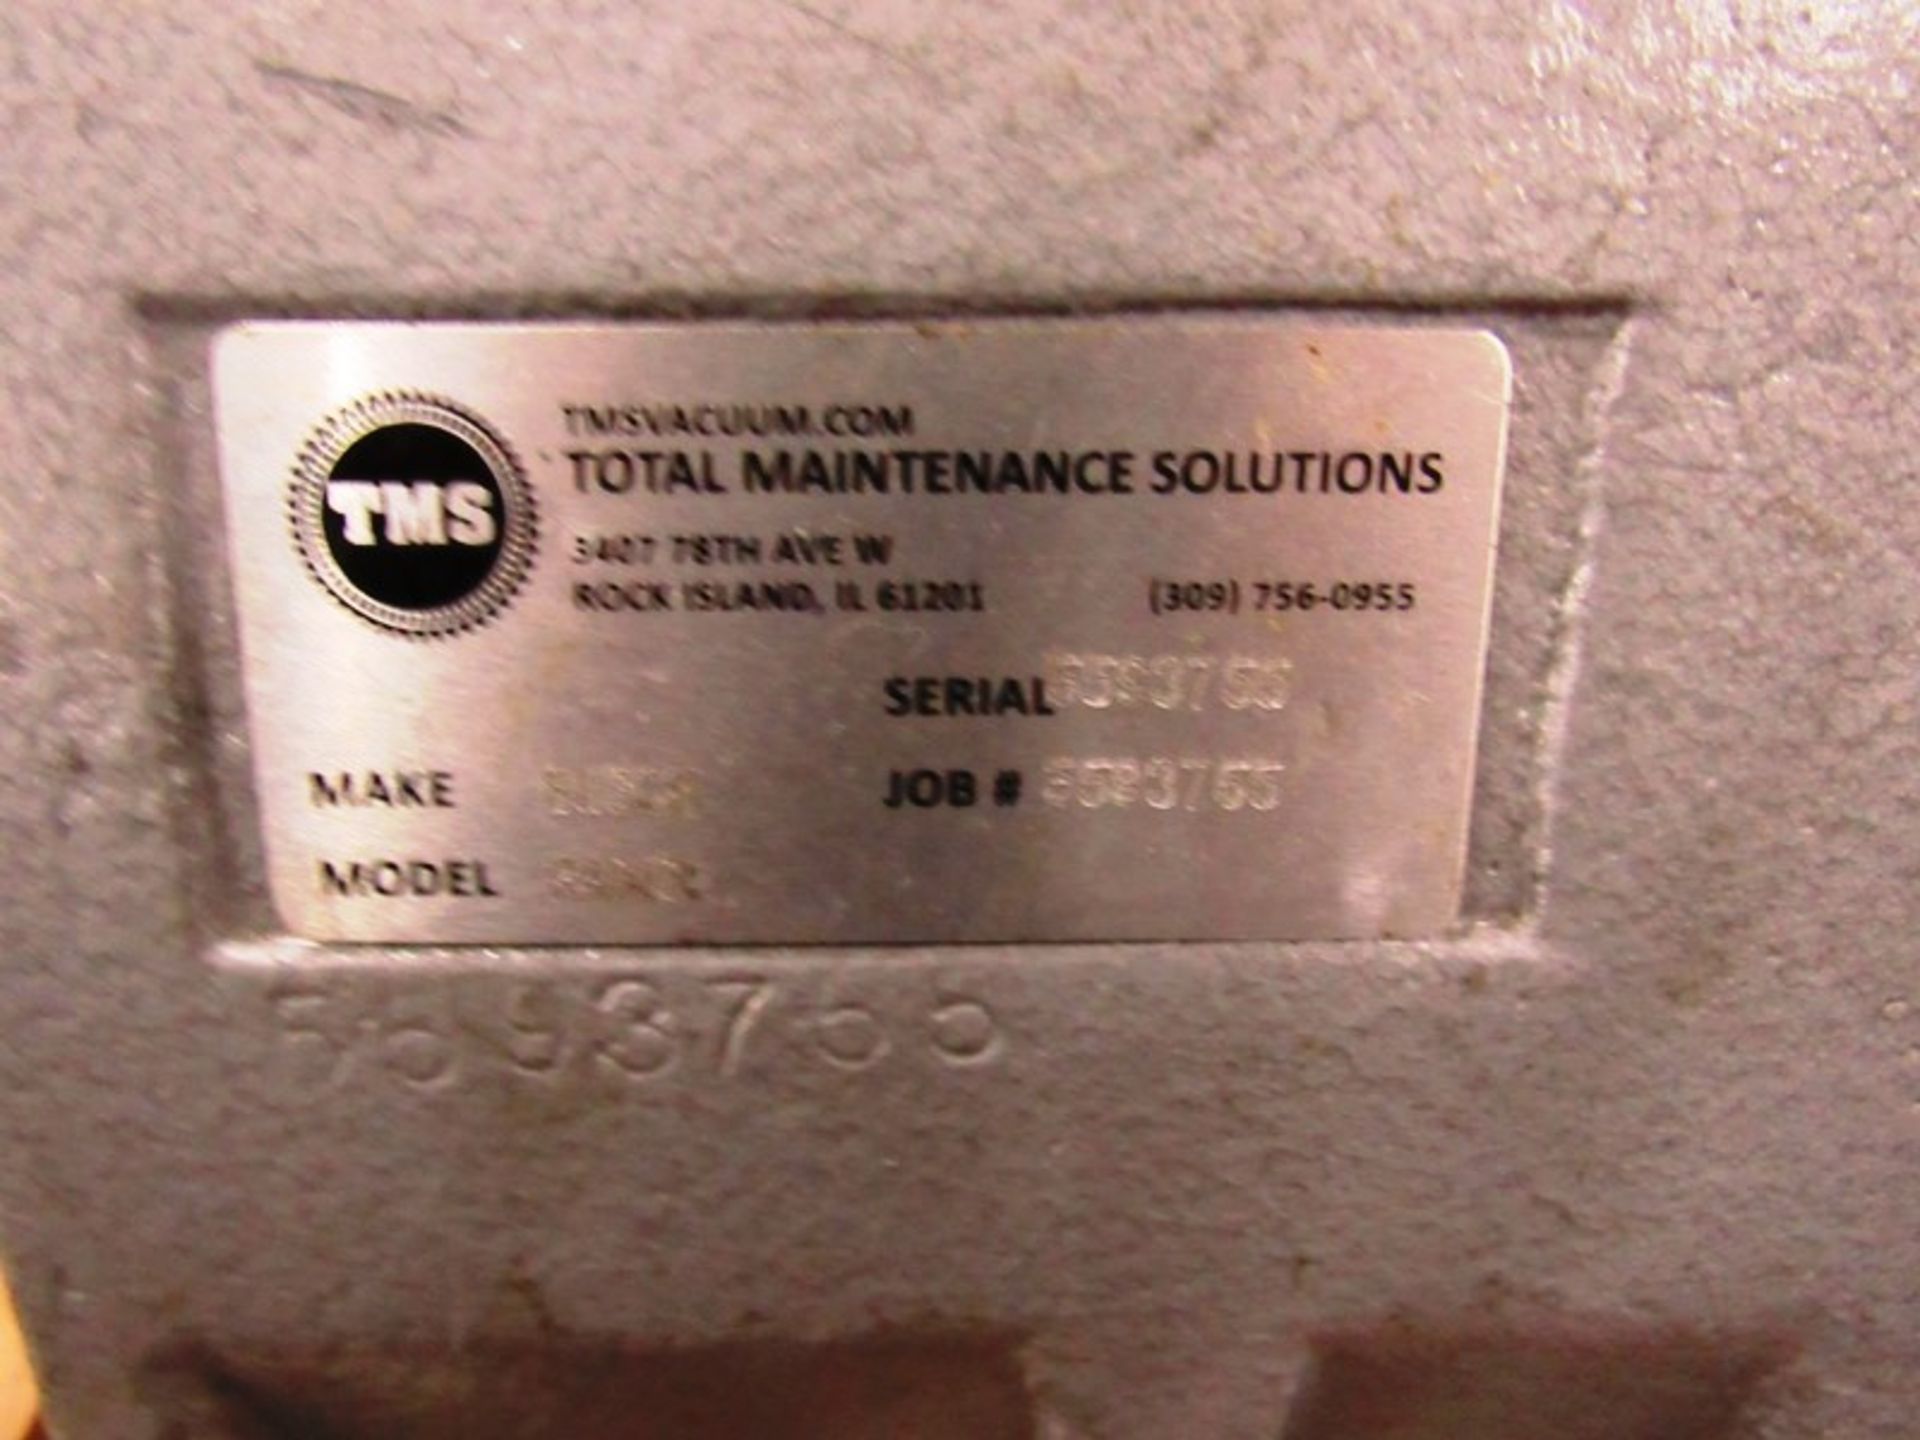 Busch Mdl. RAO400 Vacuum Pump, 15 h.p., 230/460 volts (Rebuilt by TMS) - Image 6 of 6